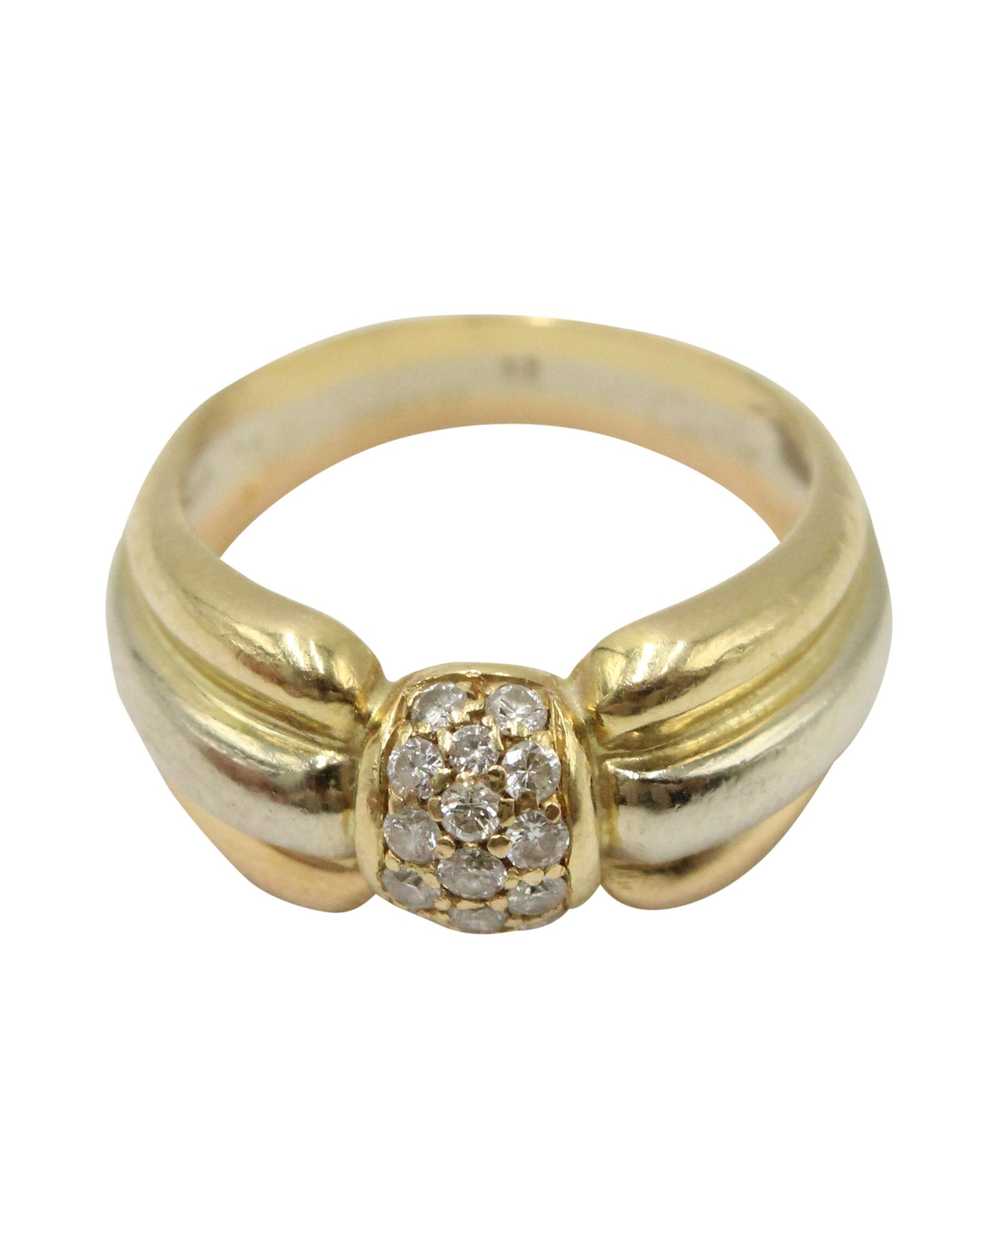 Product Details Cartier 18k Gold Diamond Ring - image 2